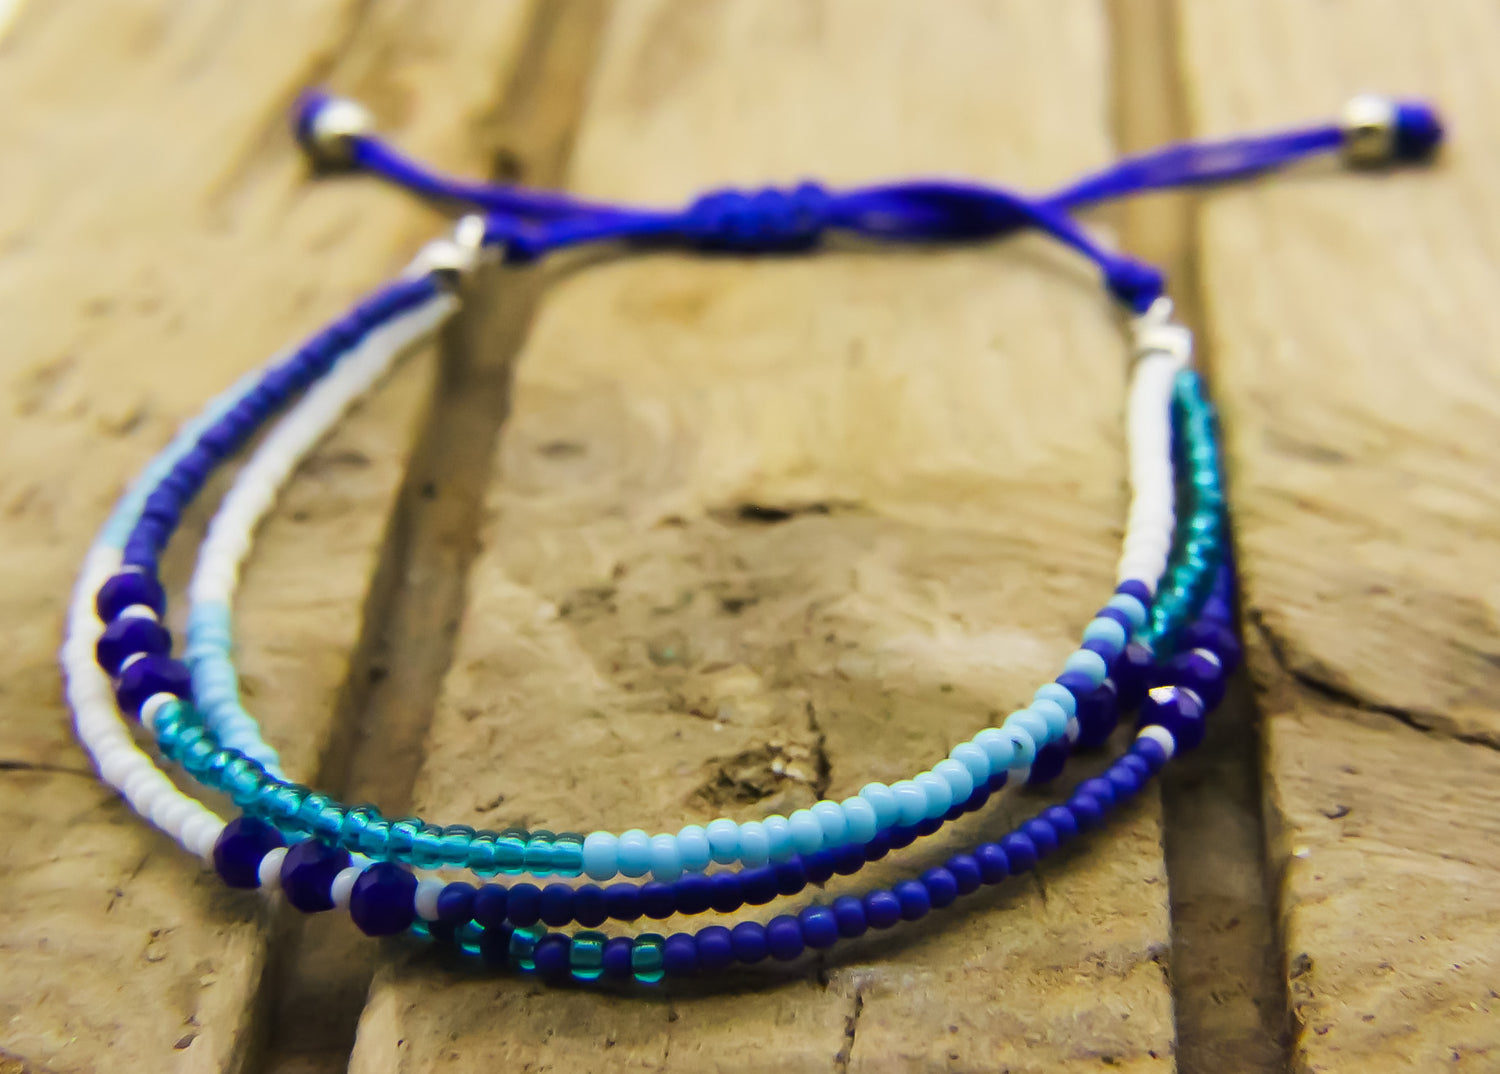 Anklet of blue and white beads on a piece of driftwood